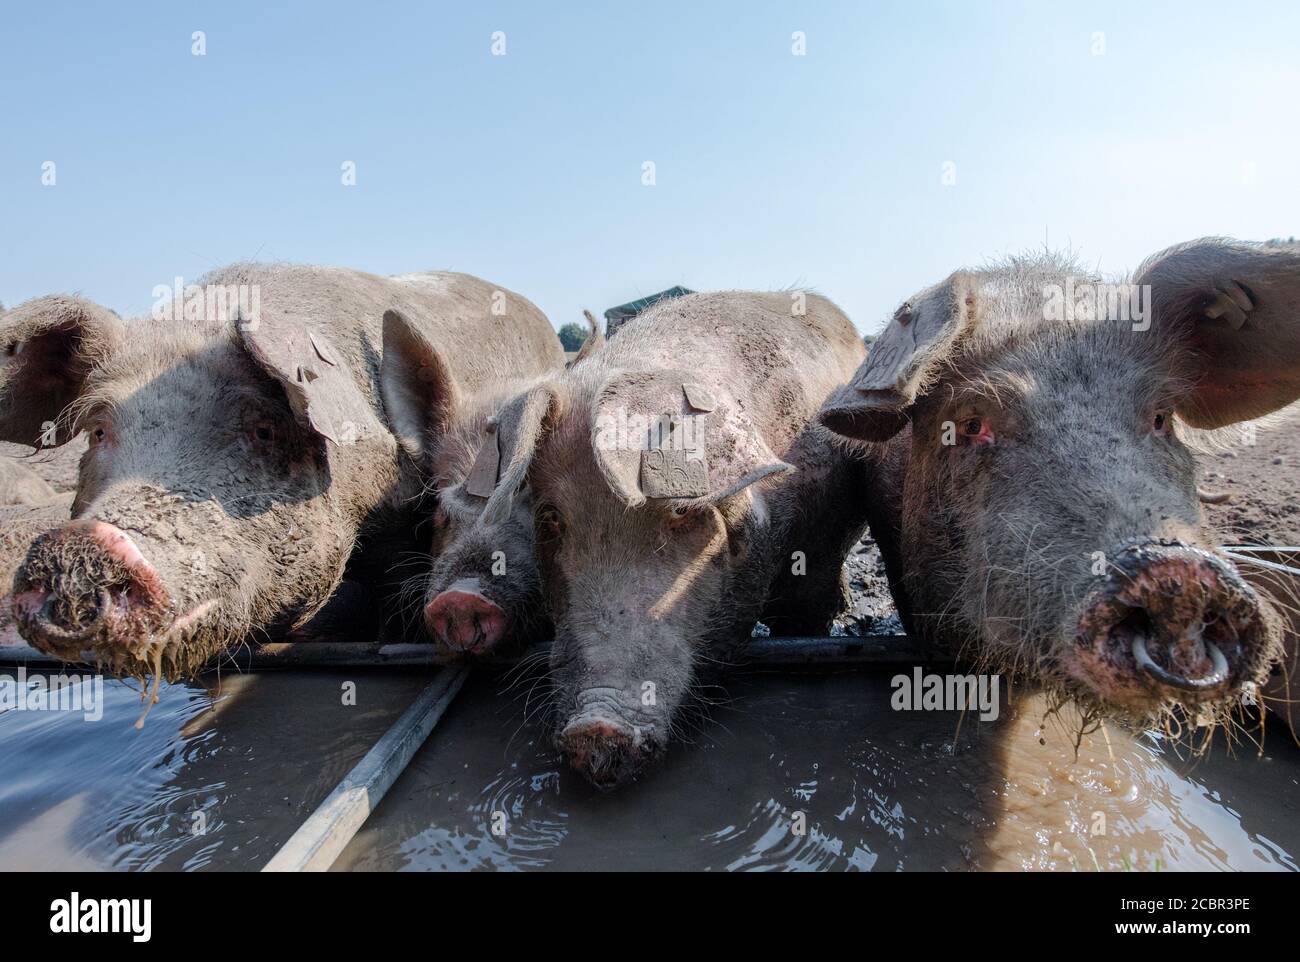 Large White pigs drinking from a water trough. Stock Photo